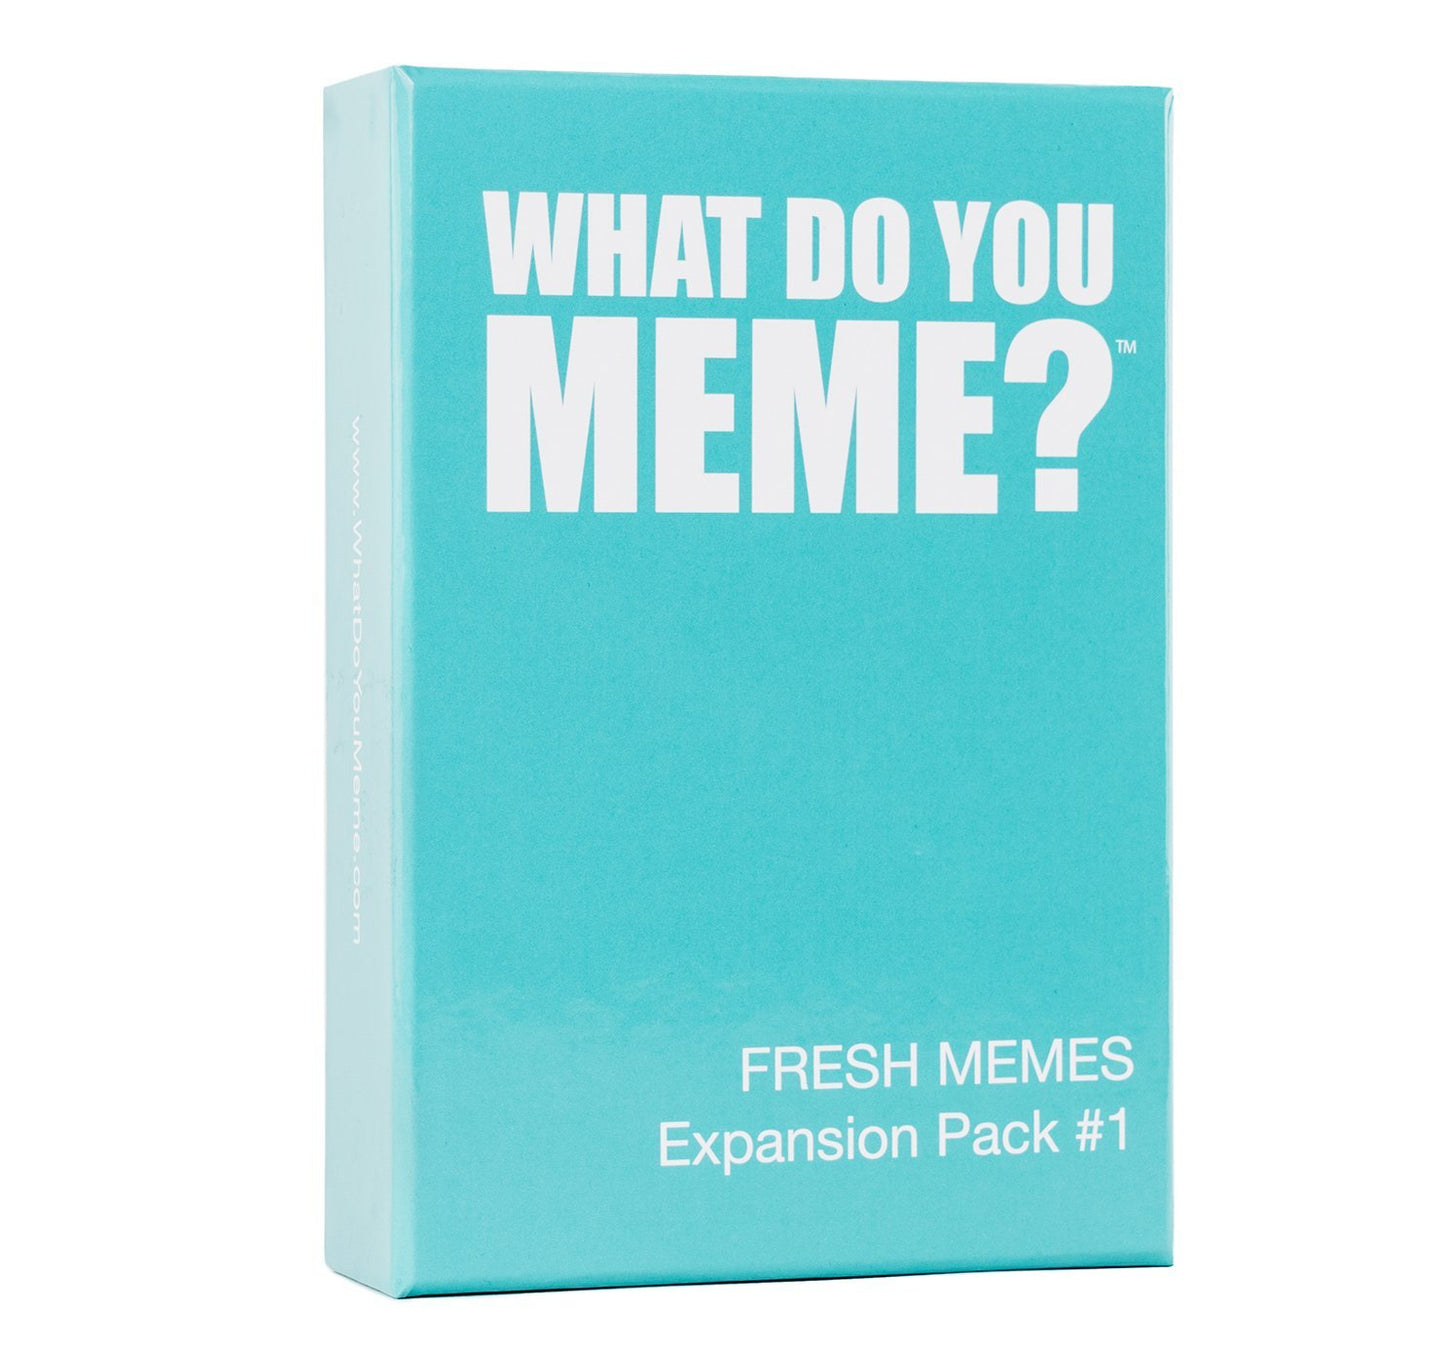 What Do You Meme?: Fresh Memes Expansion Pack 1